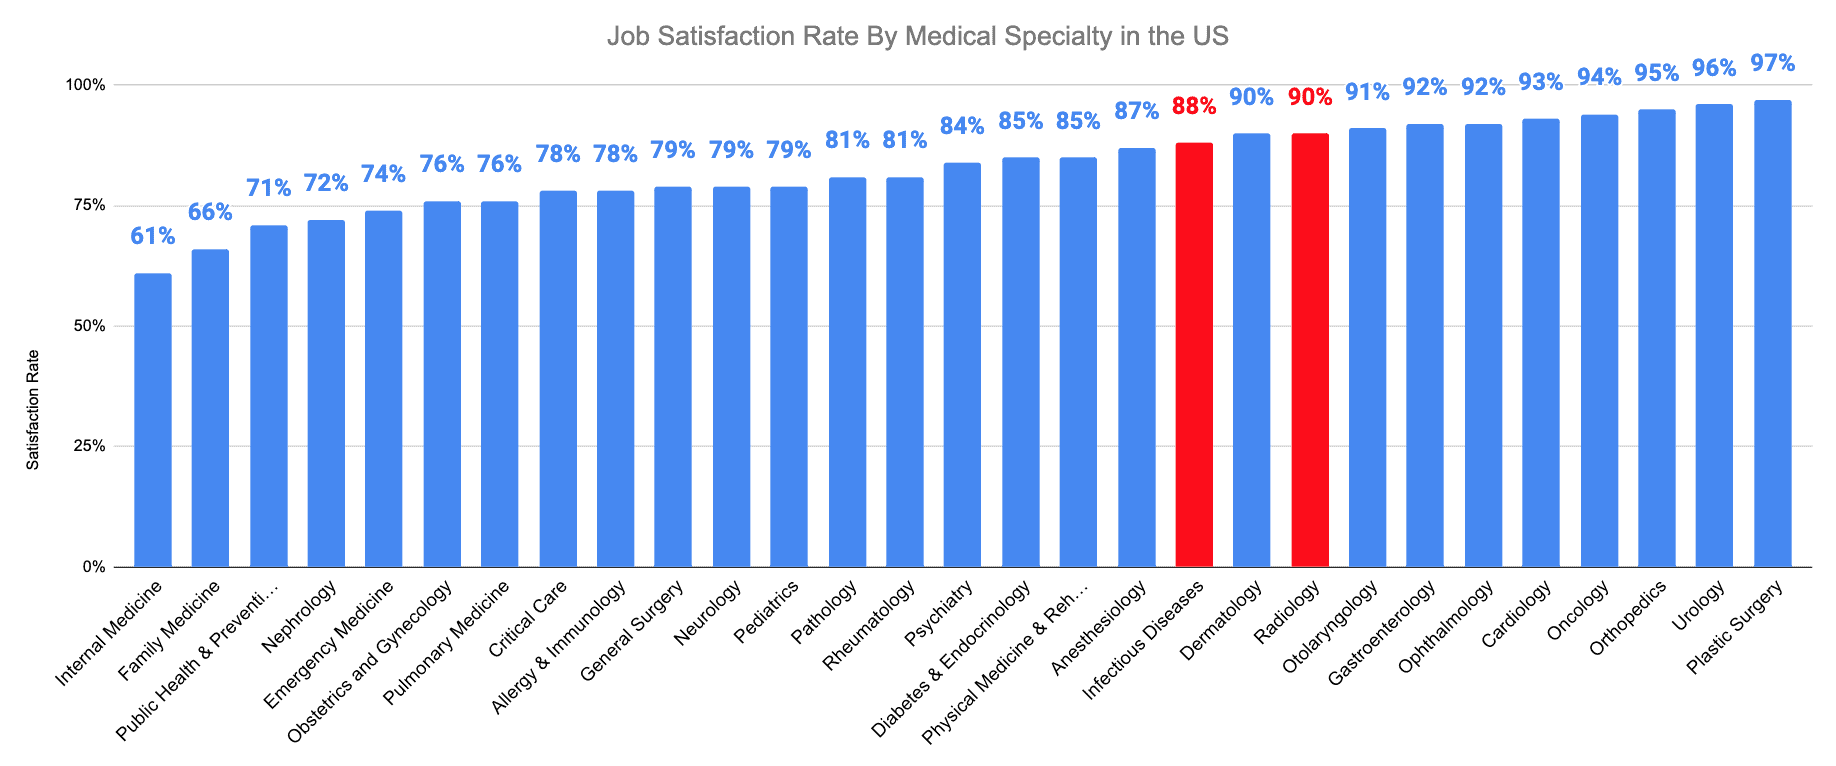 Job Satisfaction Rate By Medical Specialty in the US